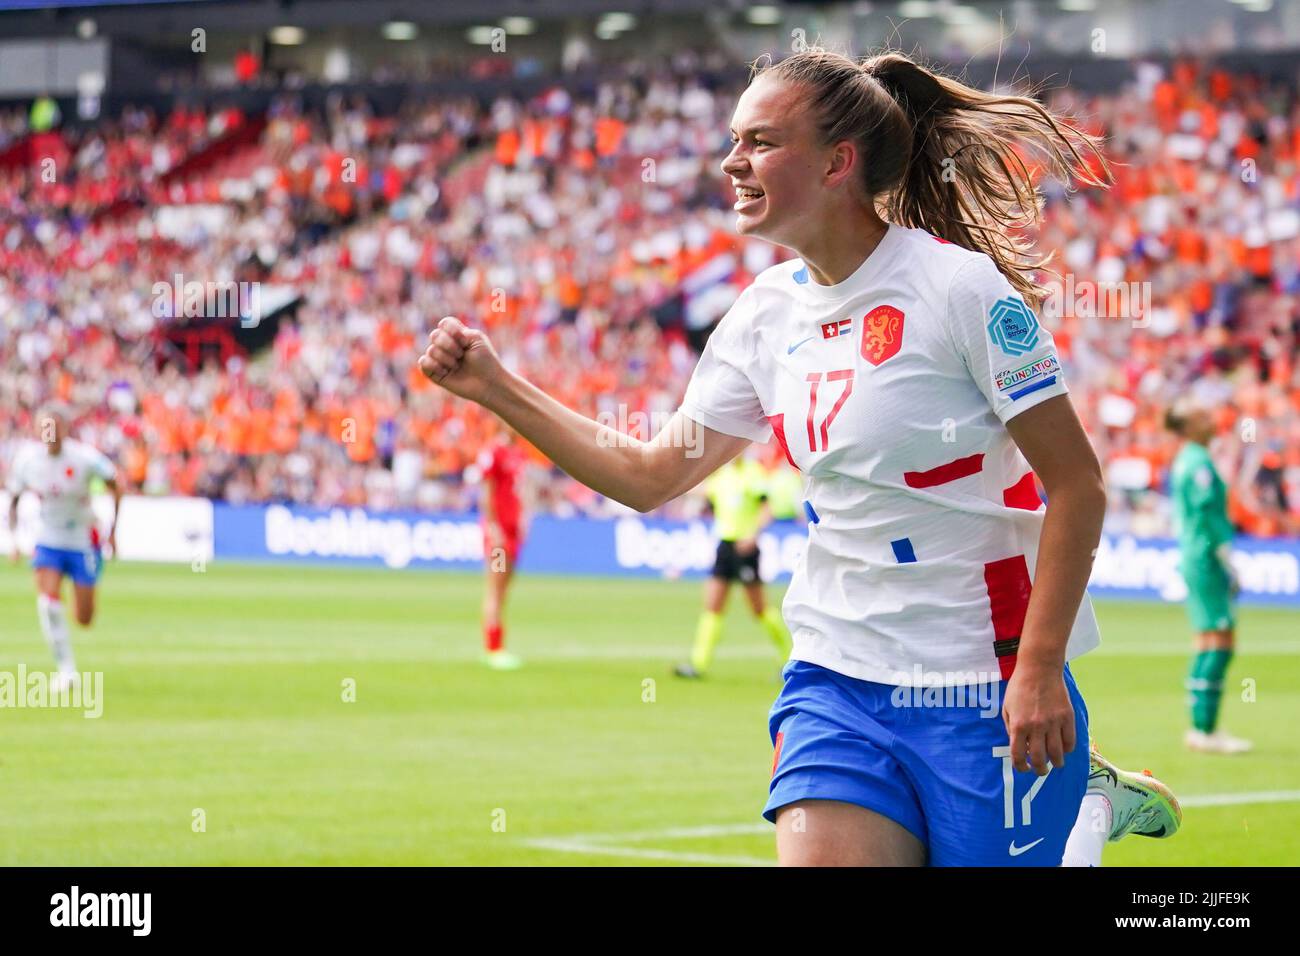 SHEFFIELD, UNITED KINGDOM - JULY 17: Romee Leuchter of the Netherlands  celebrates after scoring his sides second goal during the Group C - UEFA  Women's EURO 2022 match between Switzerland and Netherlands